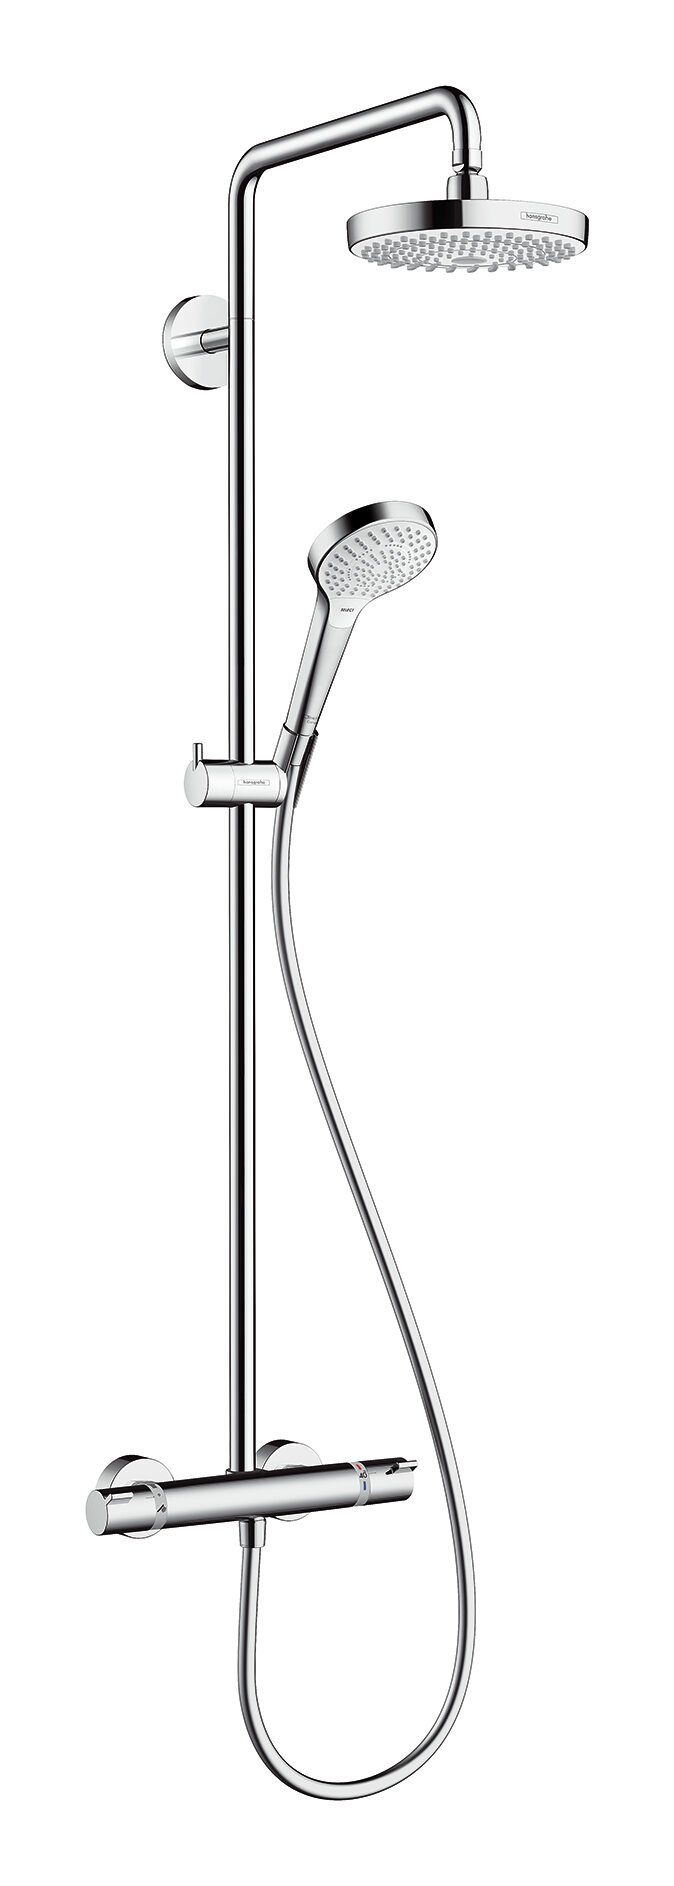 hansgrohe Duschsystem Croma Select S Weiß Showerpipe, Höhe Chrom 2 114.1 cm, Strahlart(en), Thermostat mit 2jet / 180